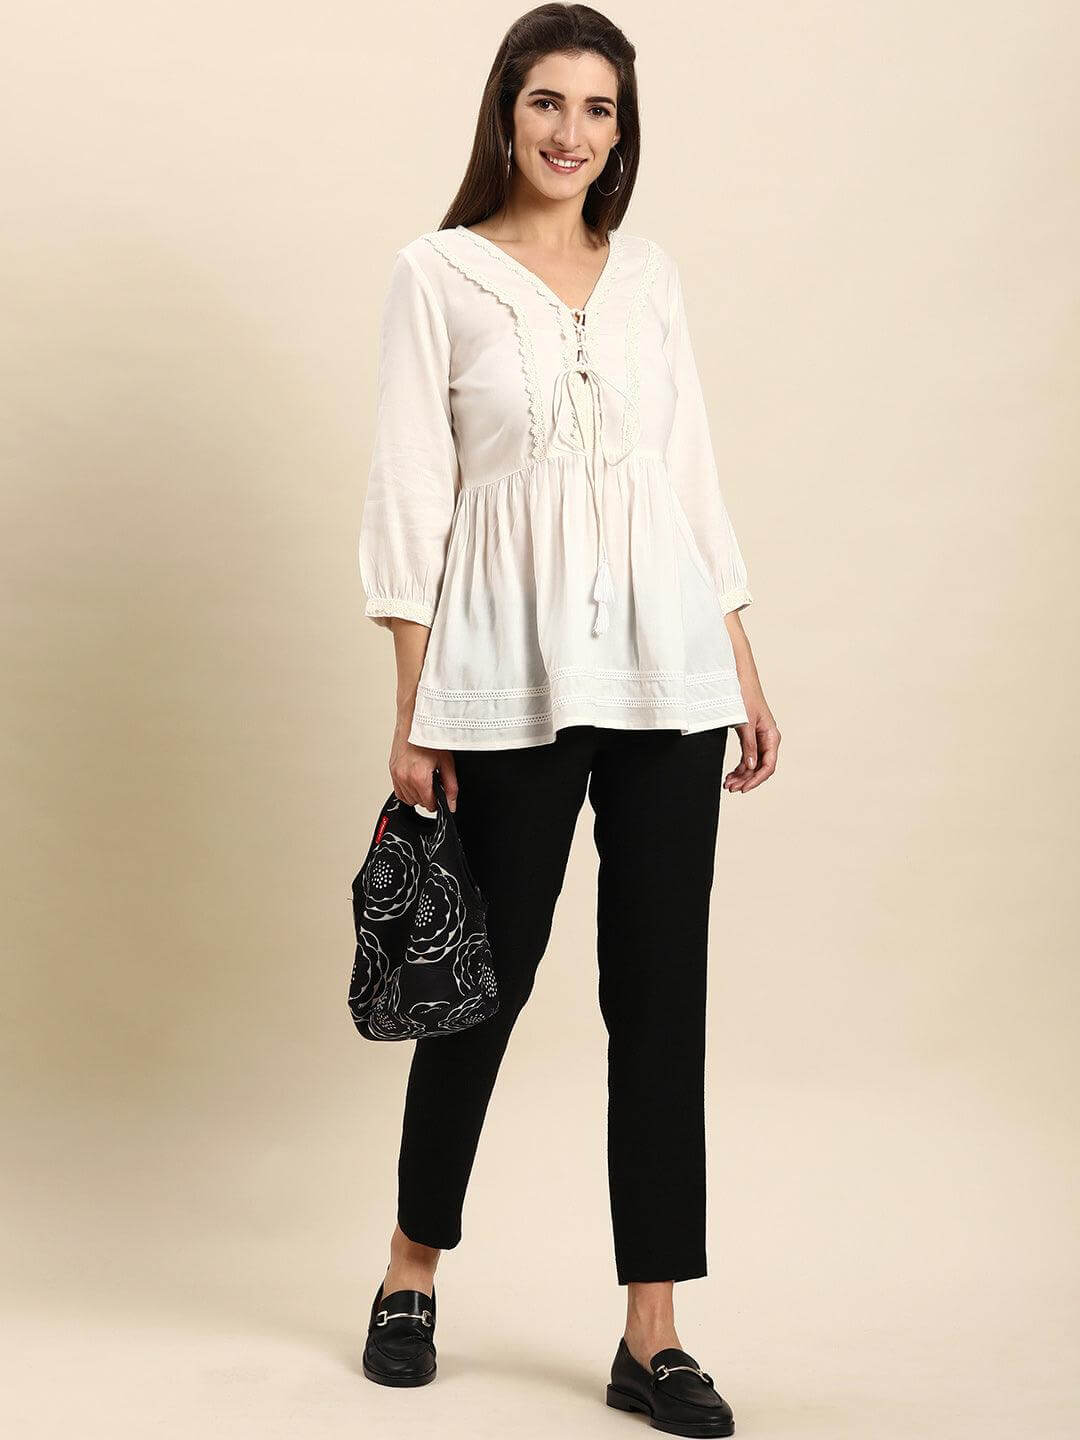 White Rayon Solid Flared Top